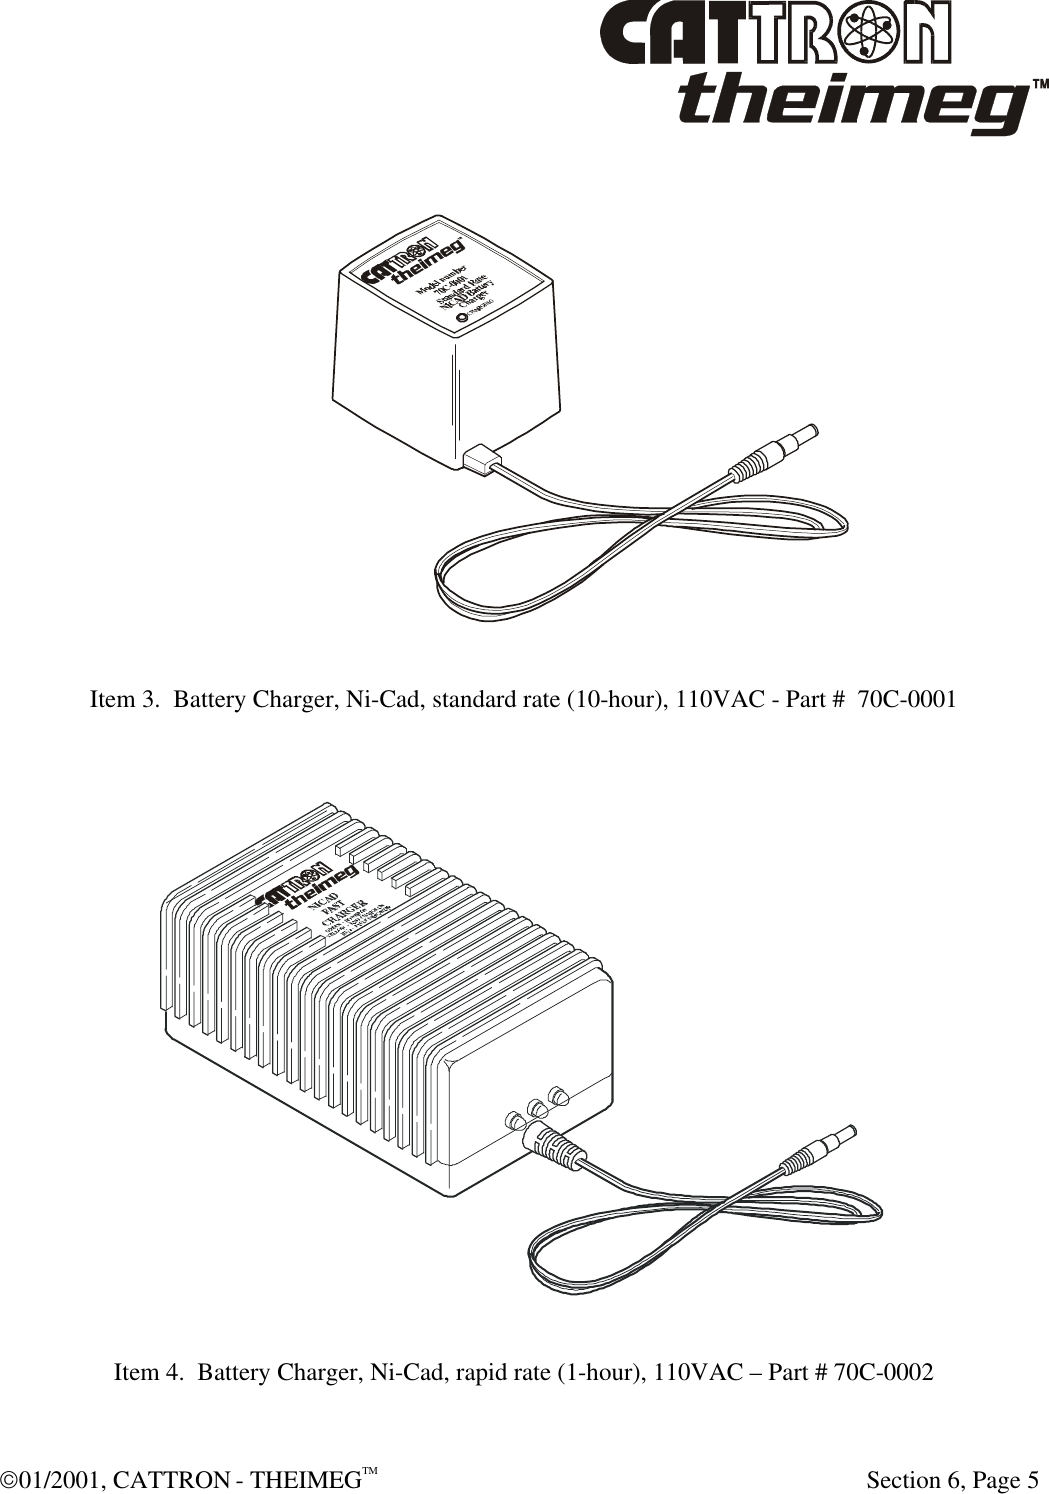  01/2001, CATTRON - THEIMEGTM  Section 6, Page 5   Item 3.  Battery Charger, Ni-Cad, standard rate (10-hour), 110VAC - Part #  70C-0001   Item 4.  Battery Charger, Ni-Cad, rapid rate (1-hour), 110VAC – Part # 70C-0002  